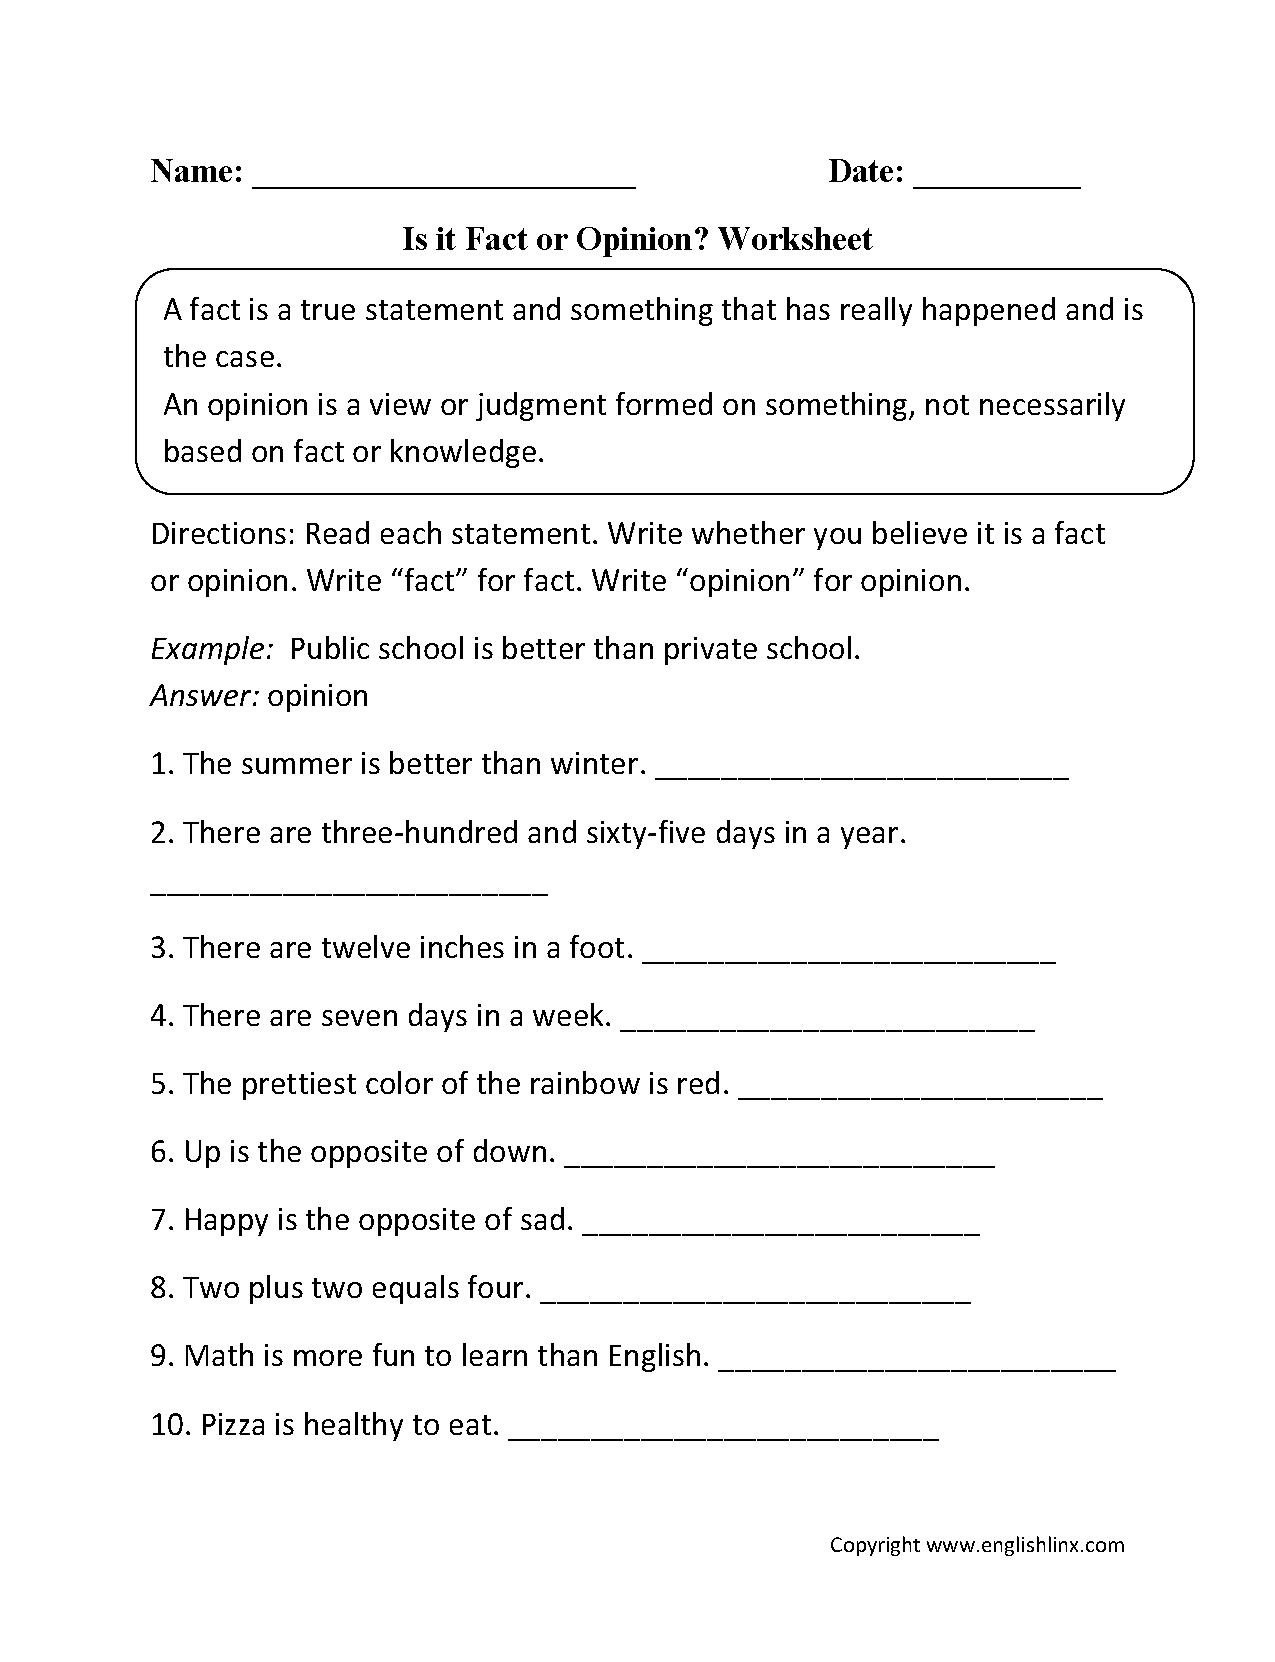 Is it Fact or Opinion? Worksheet